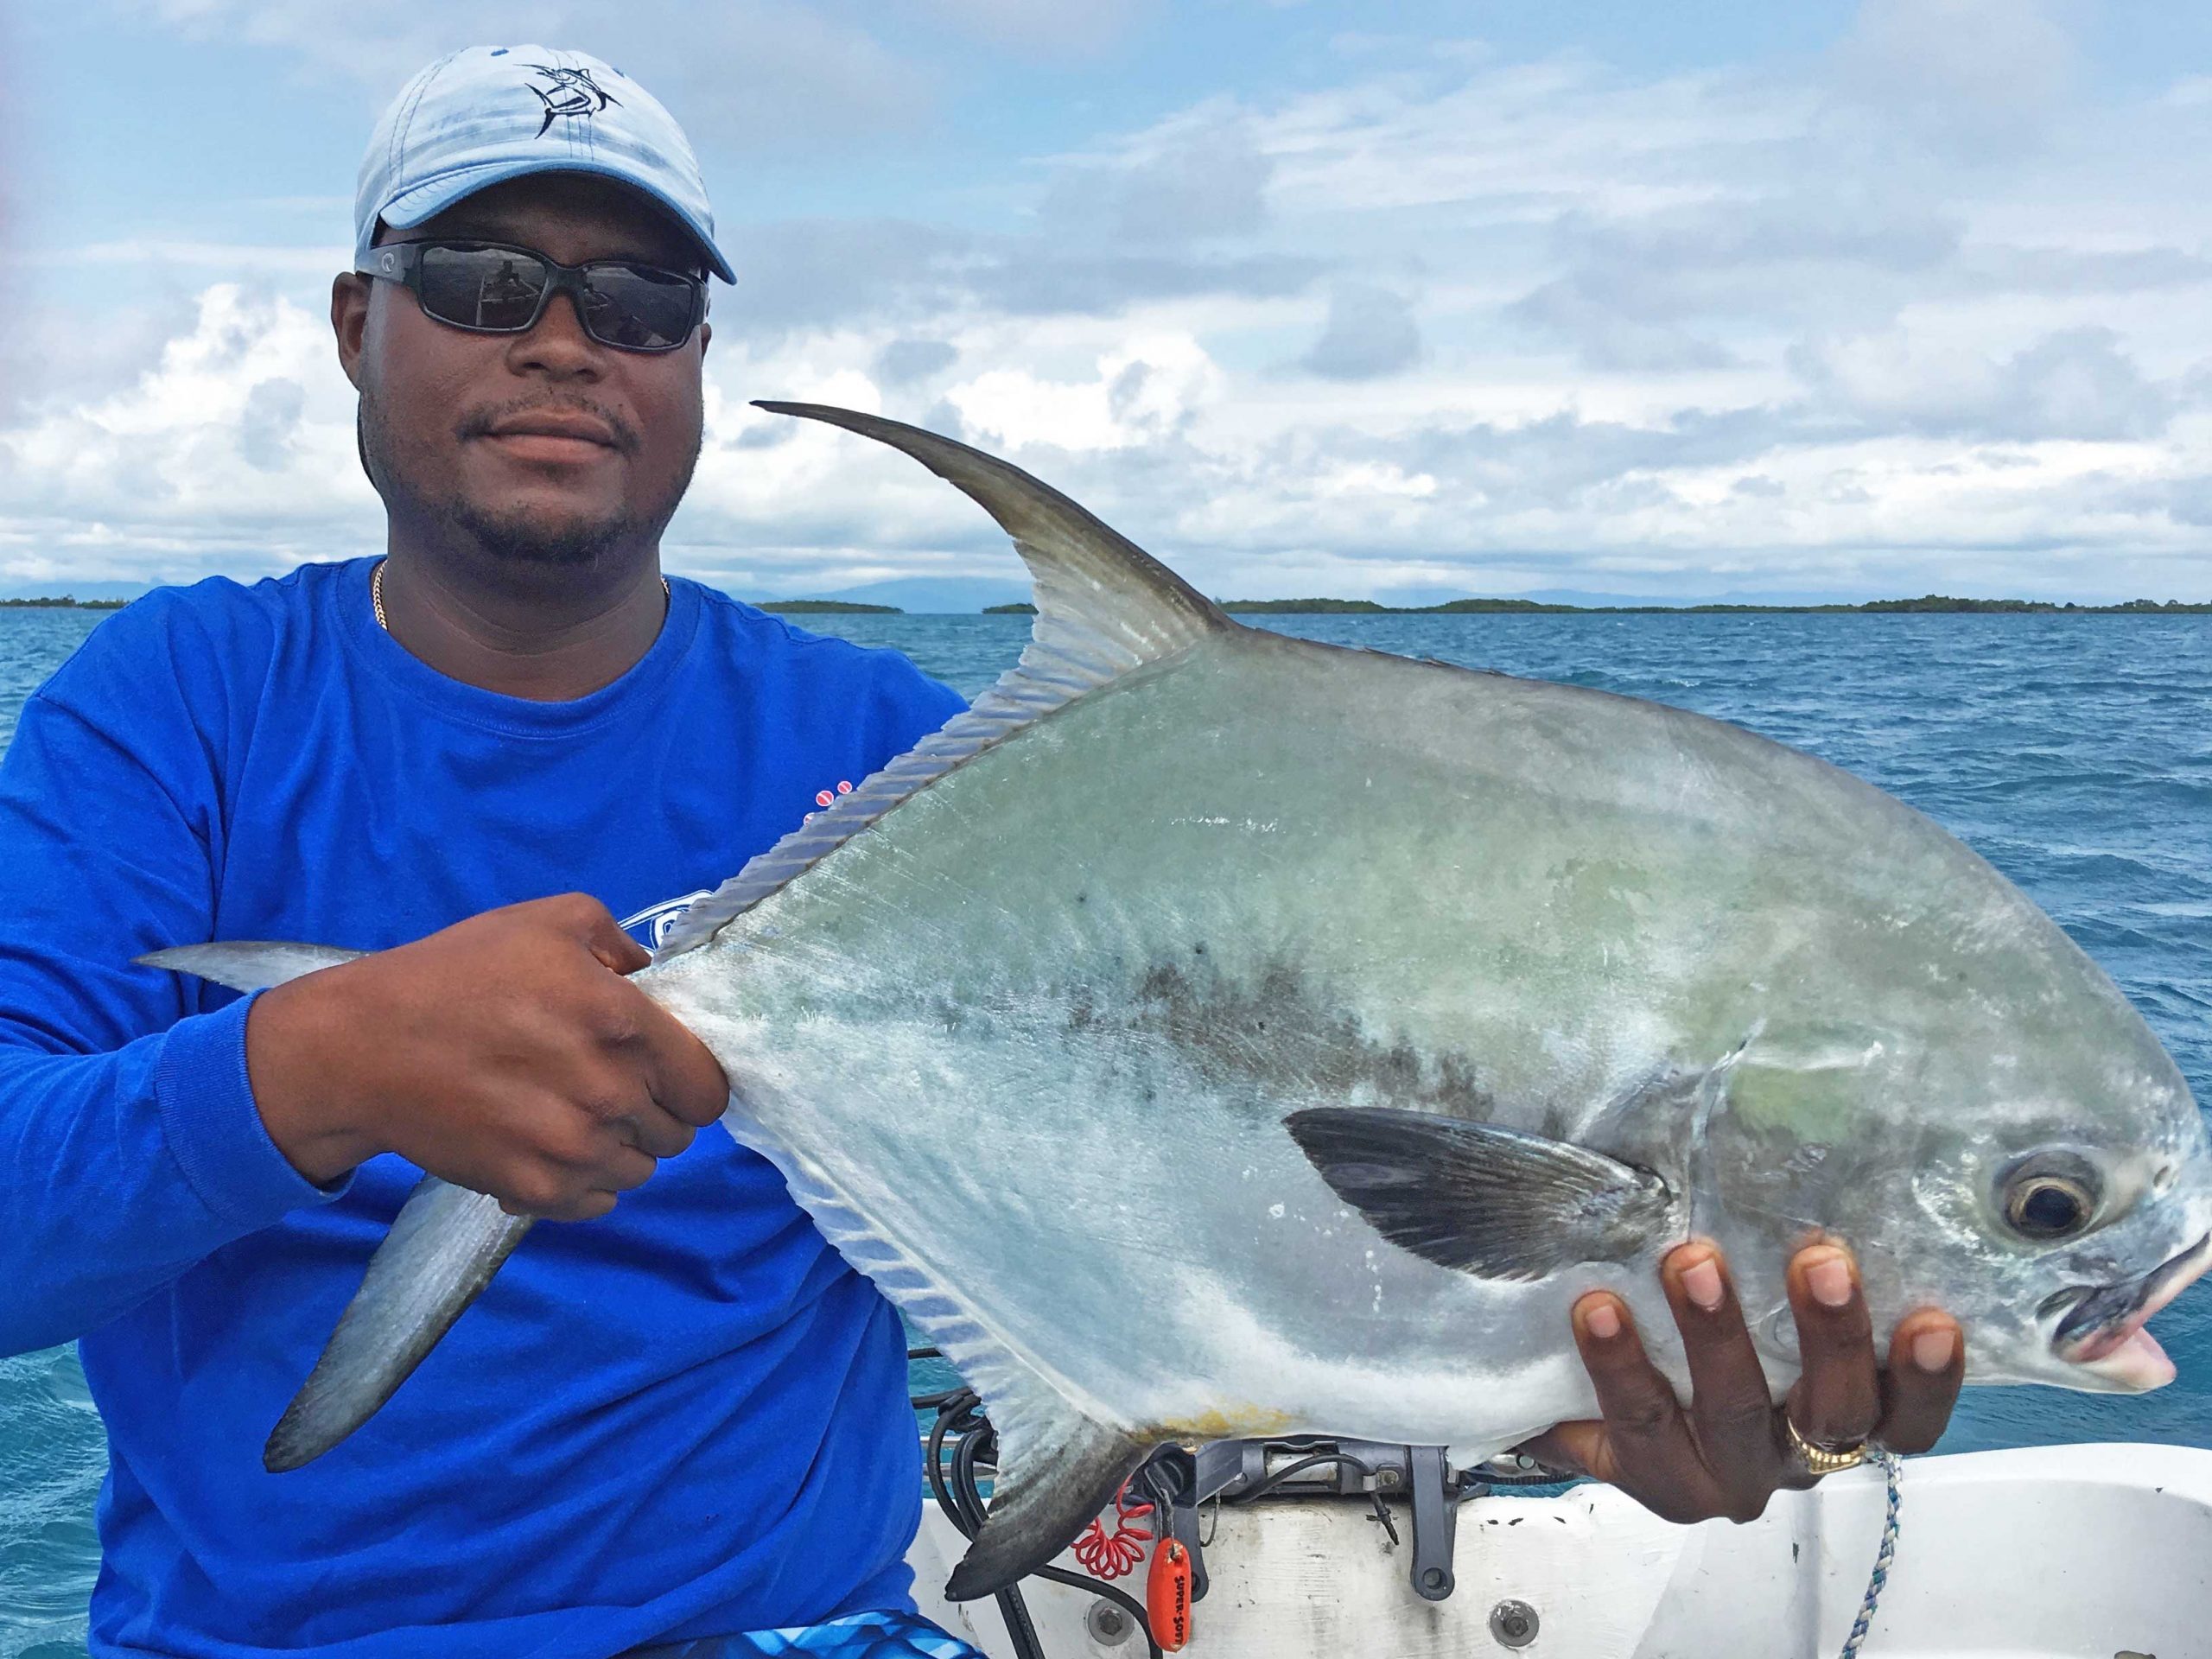 Fishing in Belize for the Grand slam permit